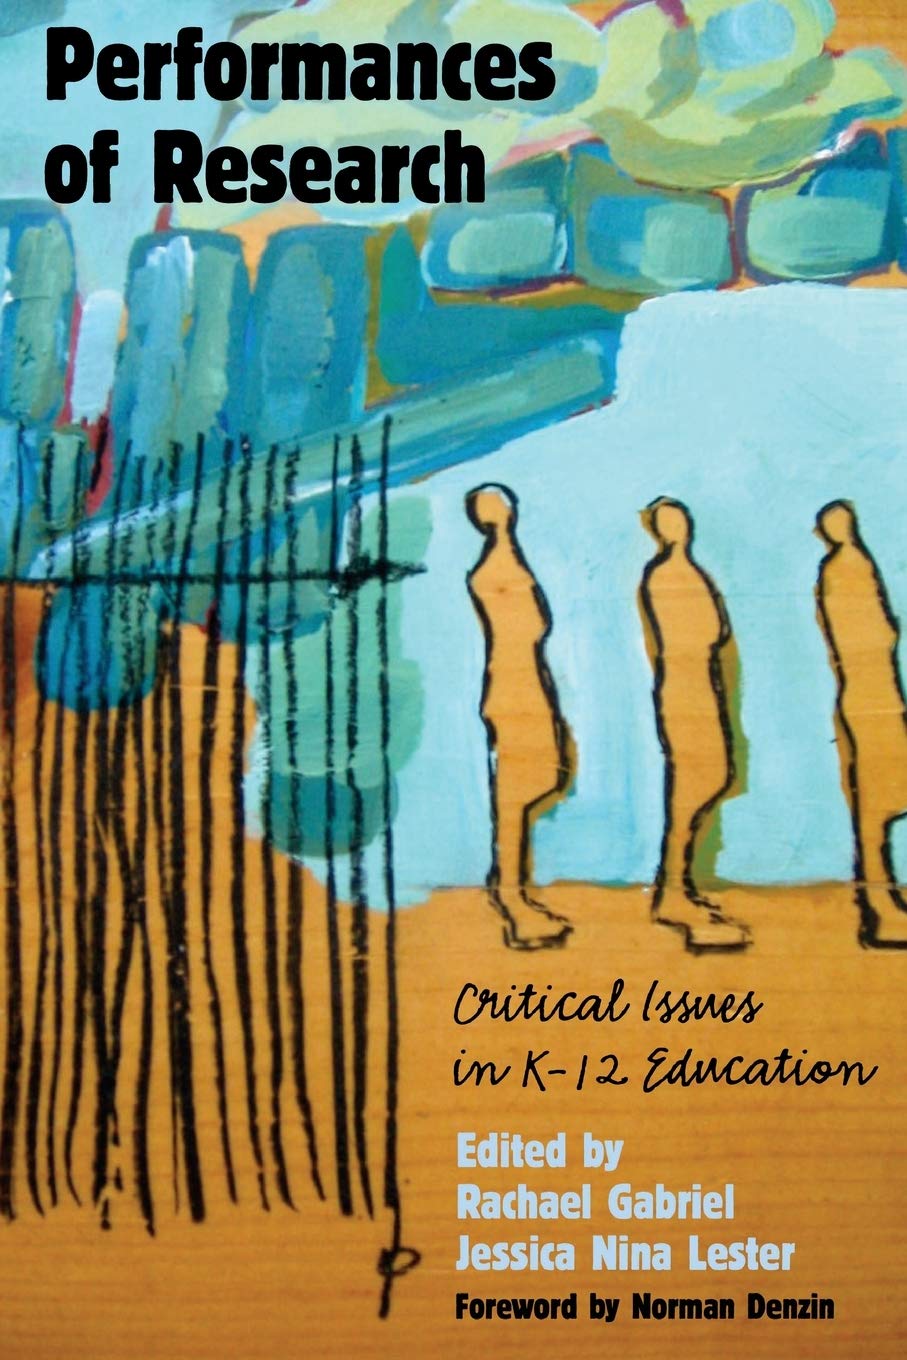 Performances of Research: Critical Issues in K-12 Education